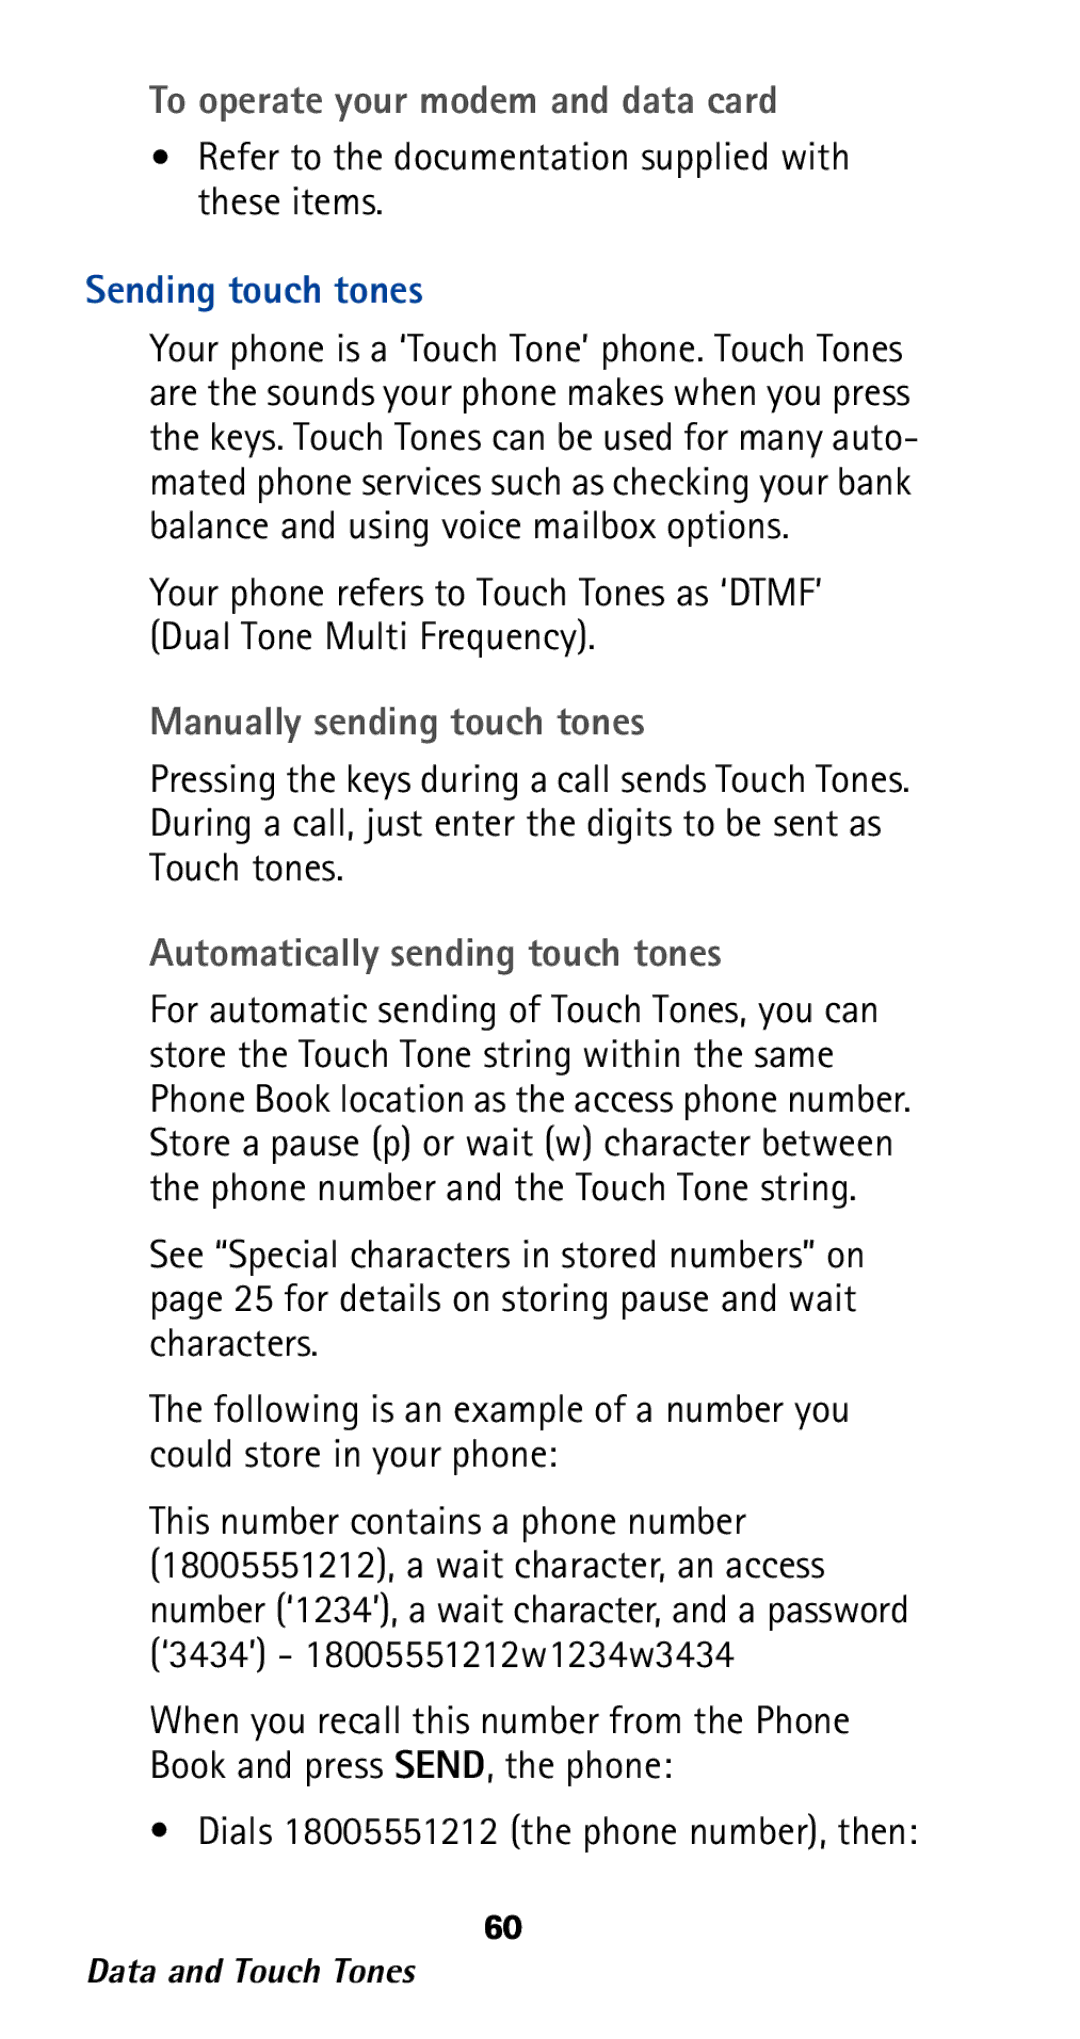 Nokia 282 owner manual To operate your modem and data card, Sending touch tones, Manually sending touch tones 